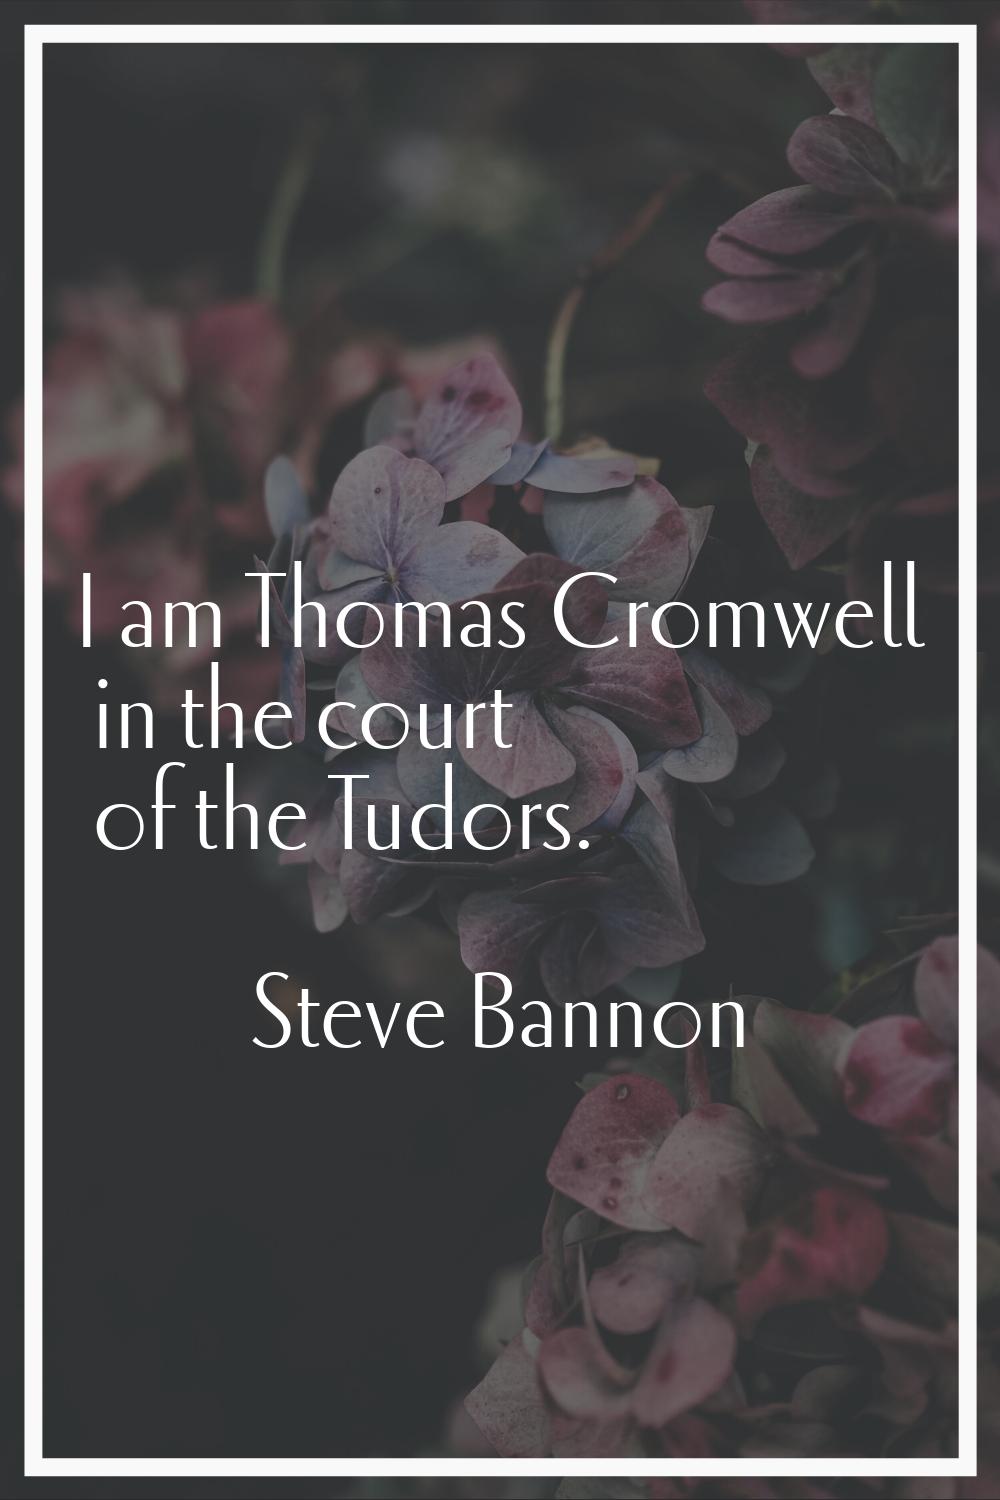 I am Thomas Cromwell in the court of the Tudors.